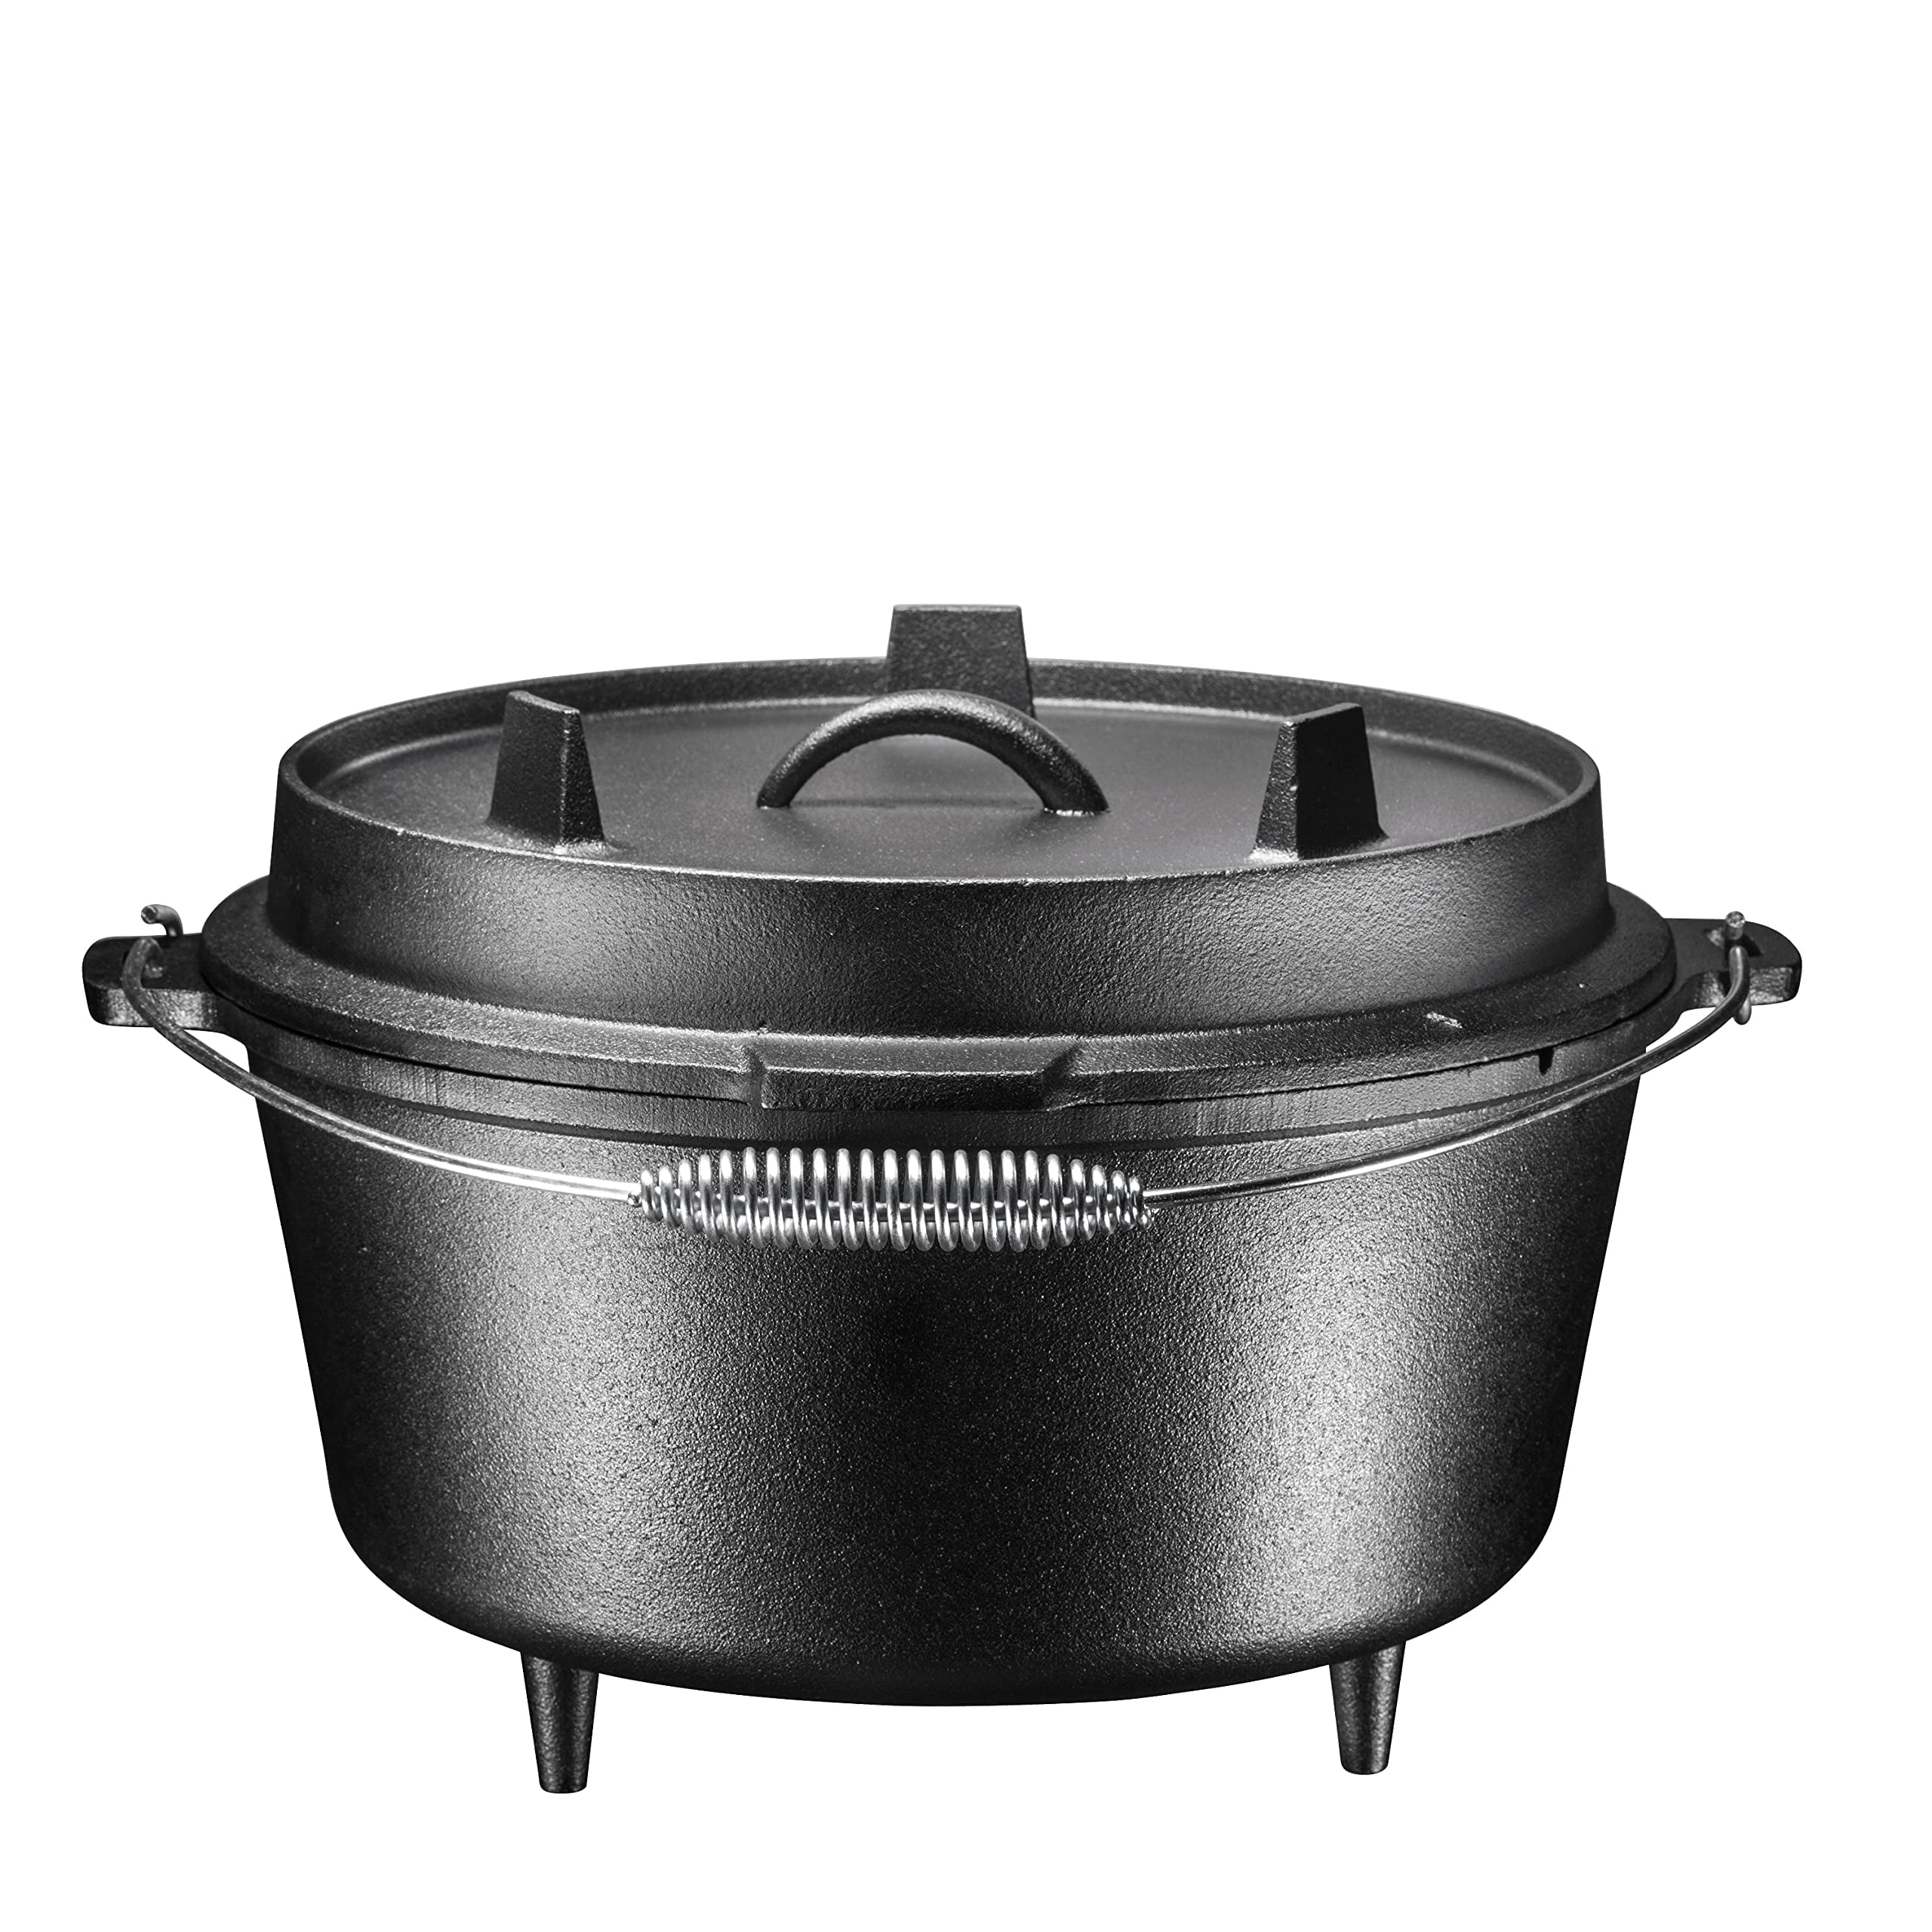 Lehman's Campfire Cooking Kettle Pot - Cast Iron Potje Dutch Oven with 3  Legs and Lid, 16 inch, 9 gallon